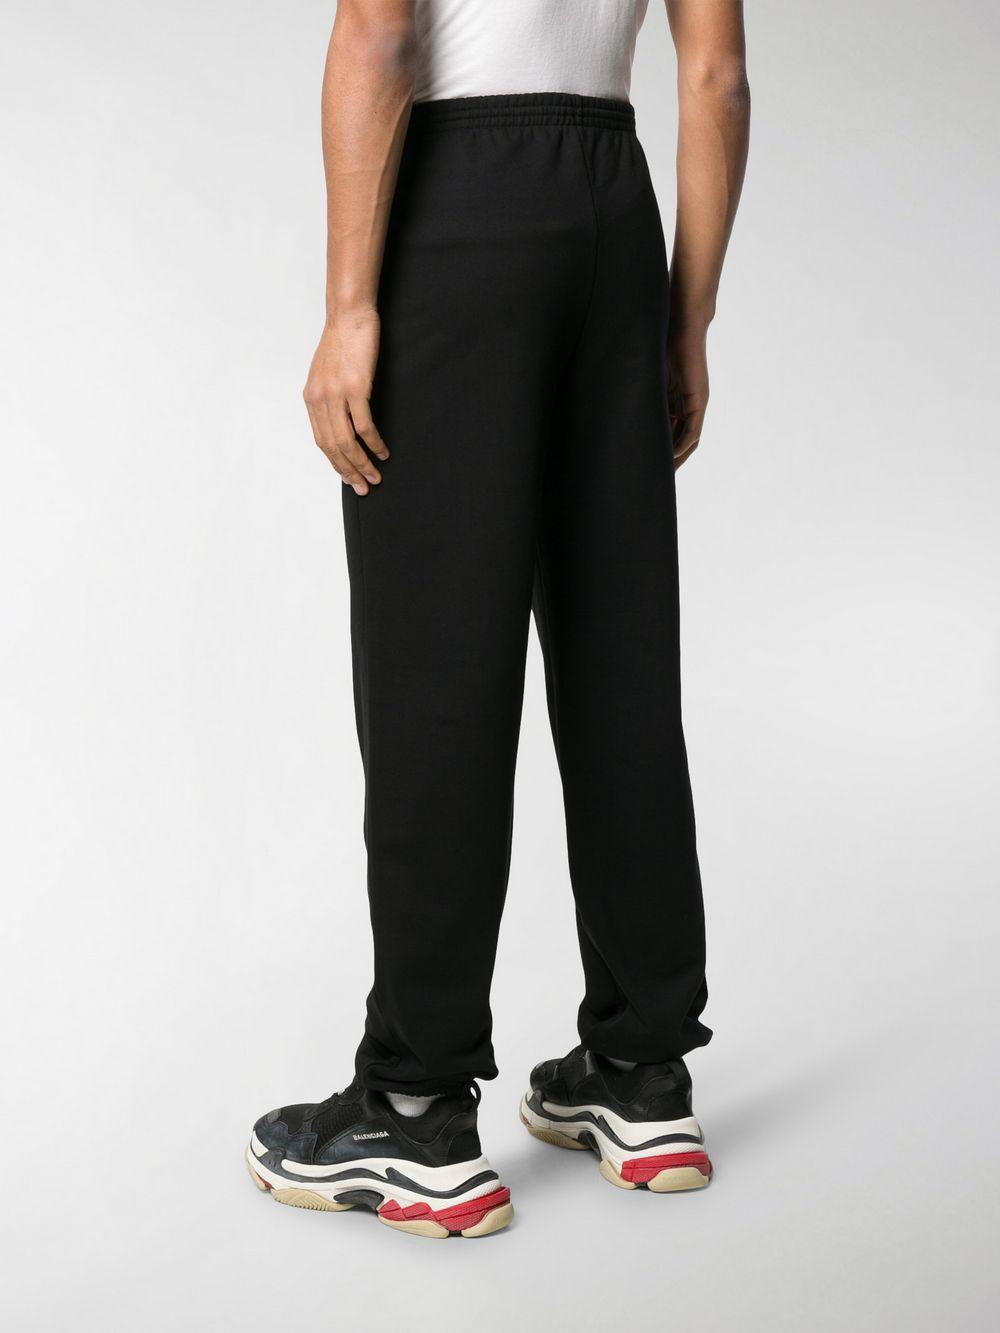 Balenciaga Cotton Loose Fit Track Pants in Black for Men - Lyst